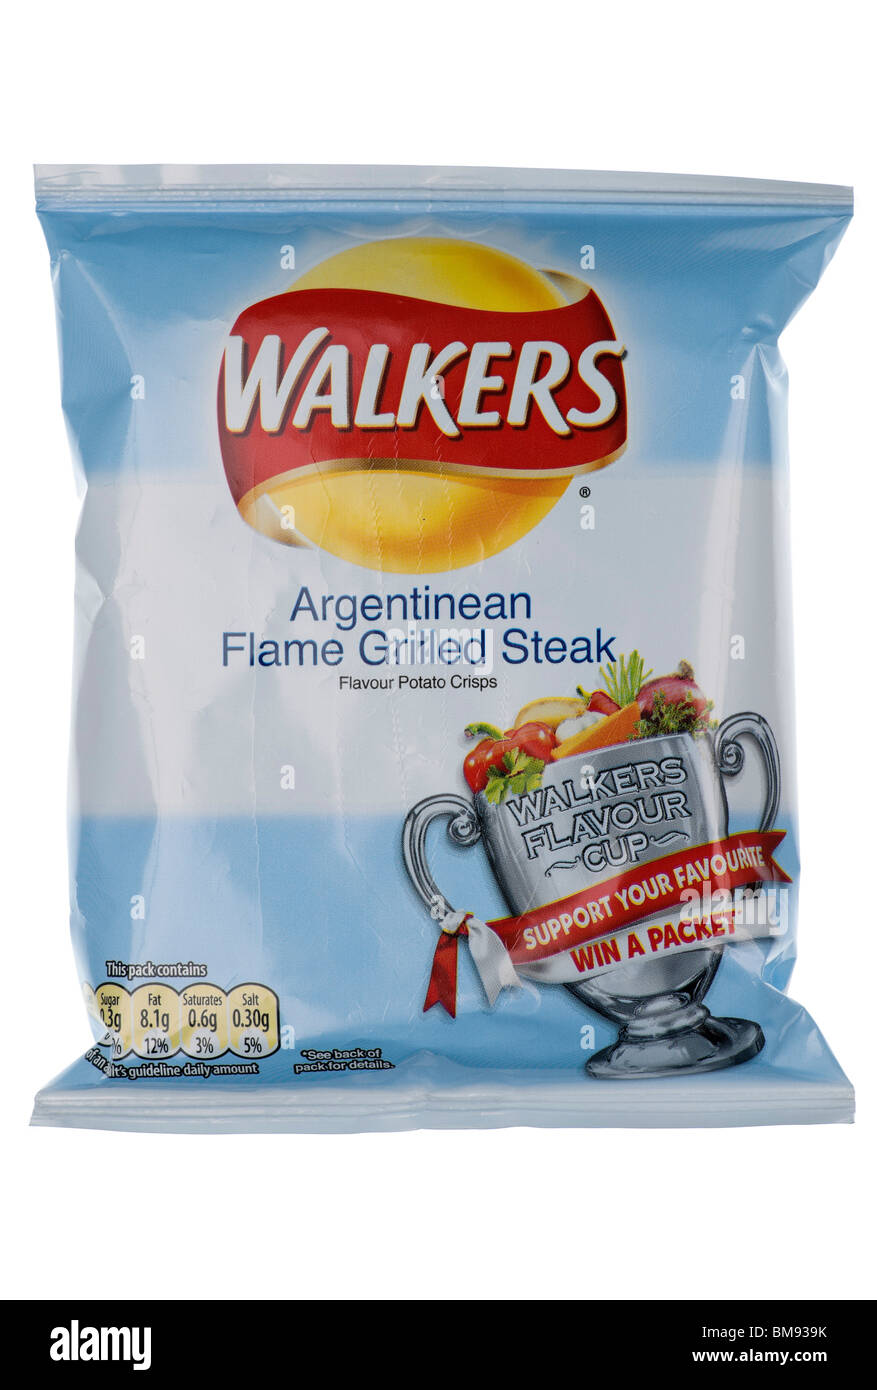 Packet of Walkers World Cup Argentinean Flame Grilled Steak Flavour Crisps - May 2010 Stock Photo